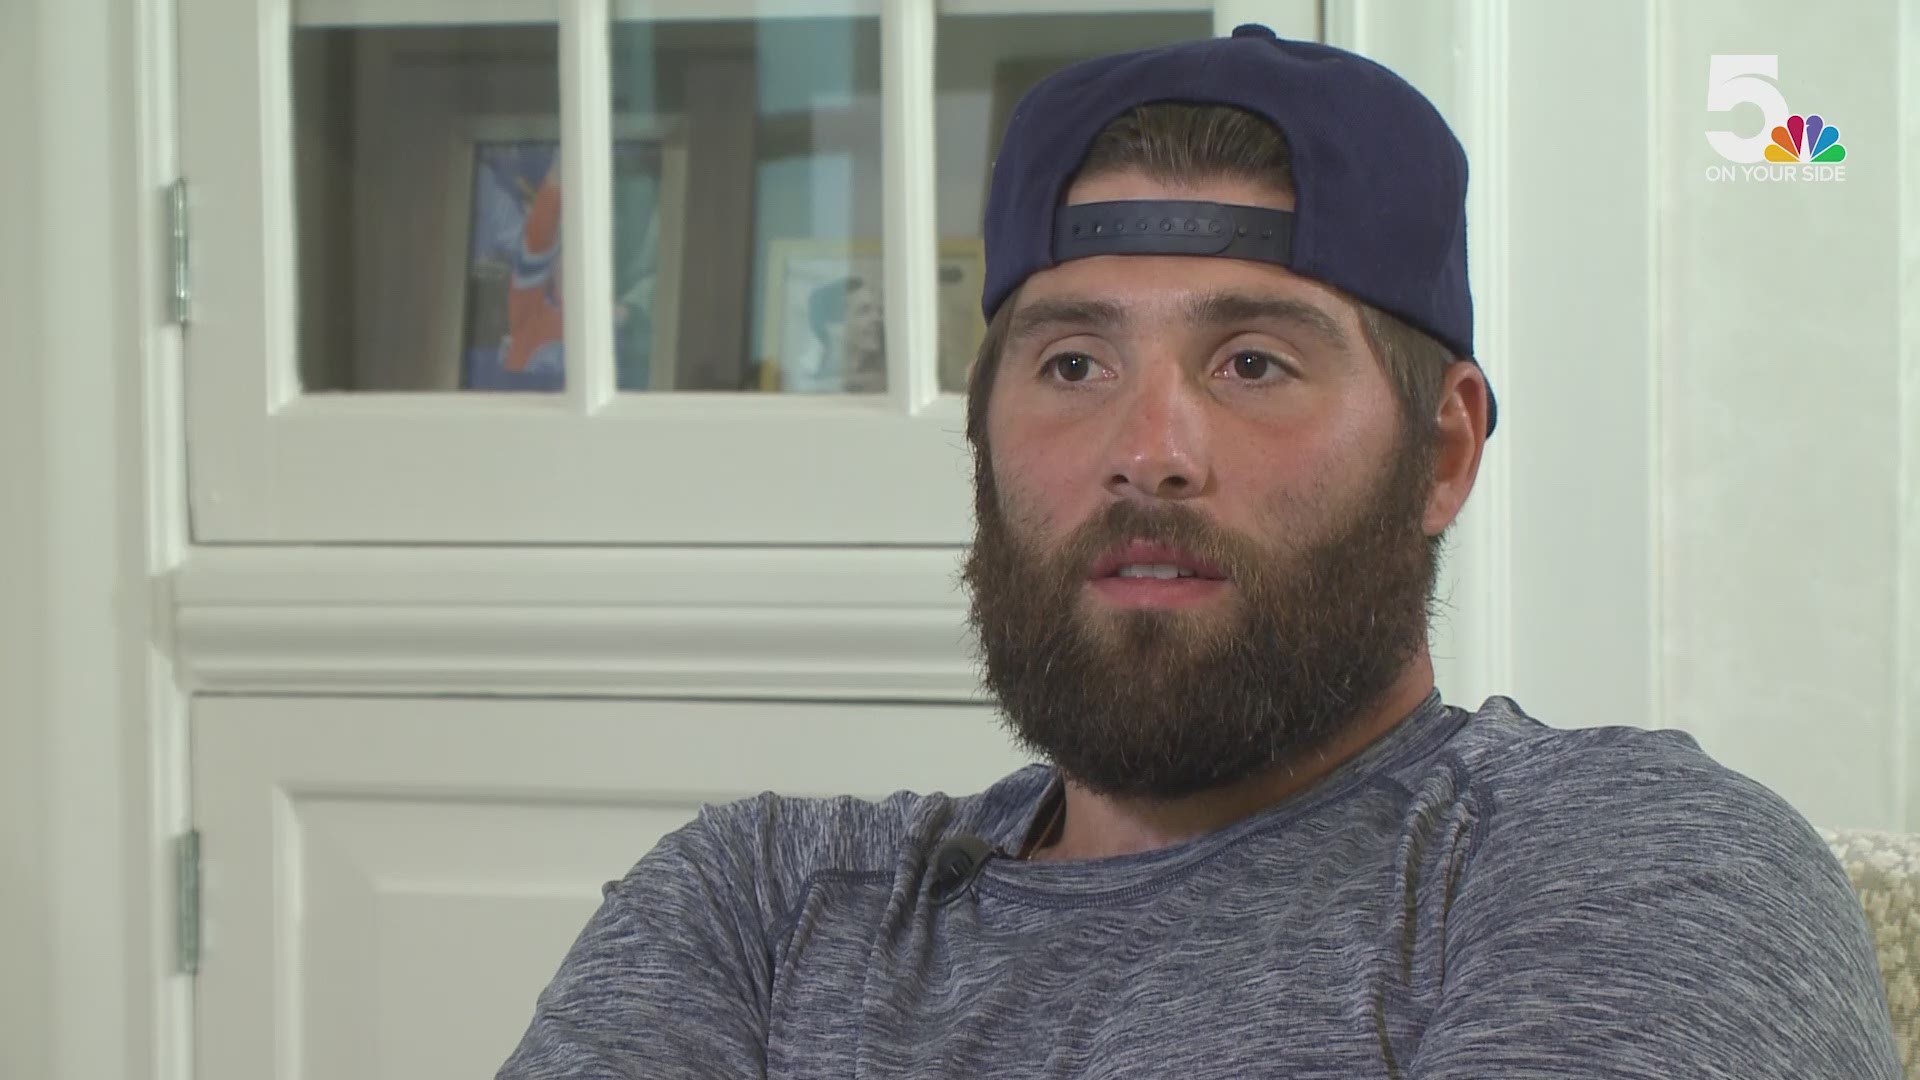 Stanley Cup Champion. Hometown hero. Local legend. Pat Maroon is still basking in Stanley Cup glory while waiting to see what his future holds.